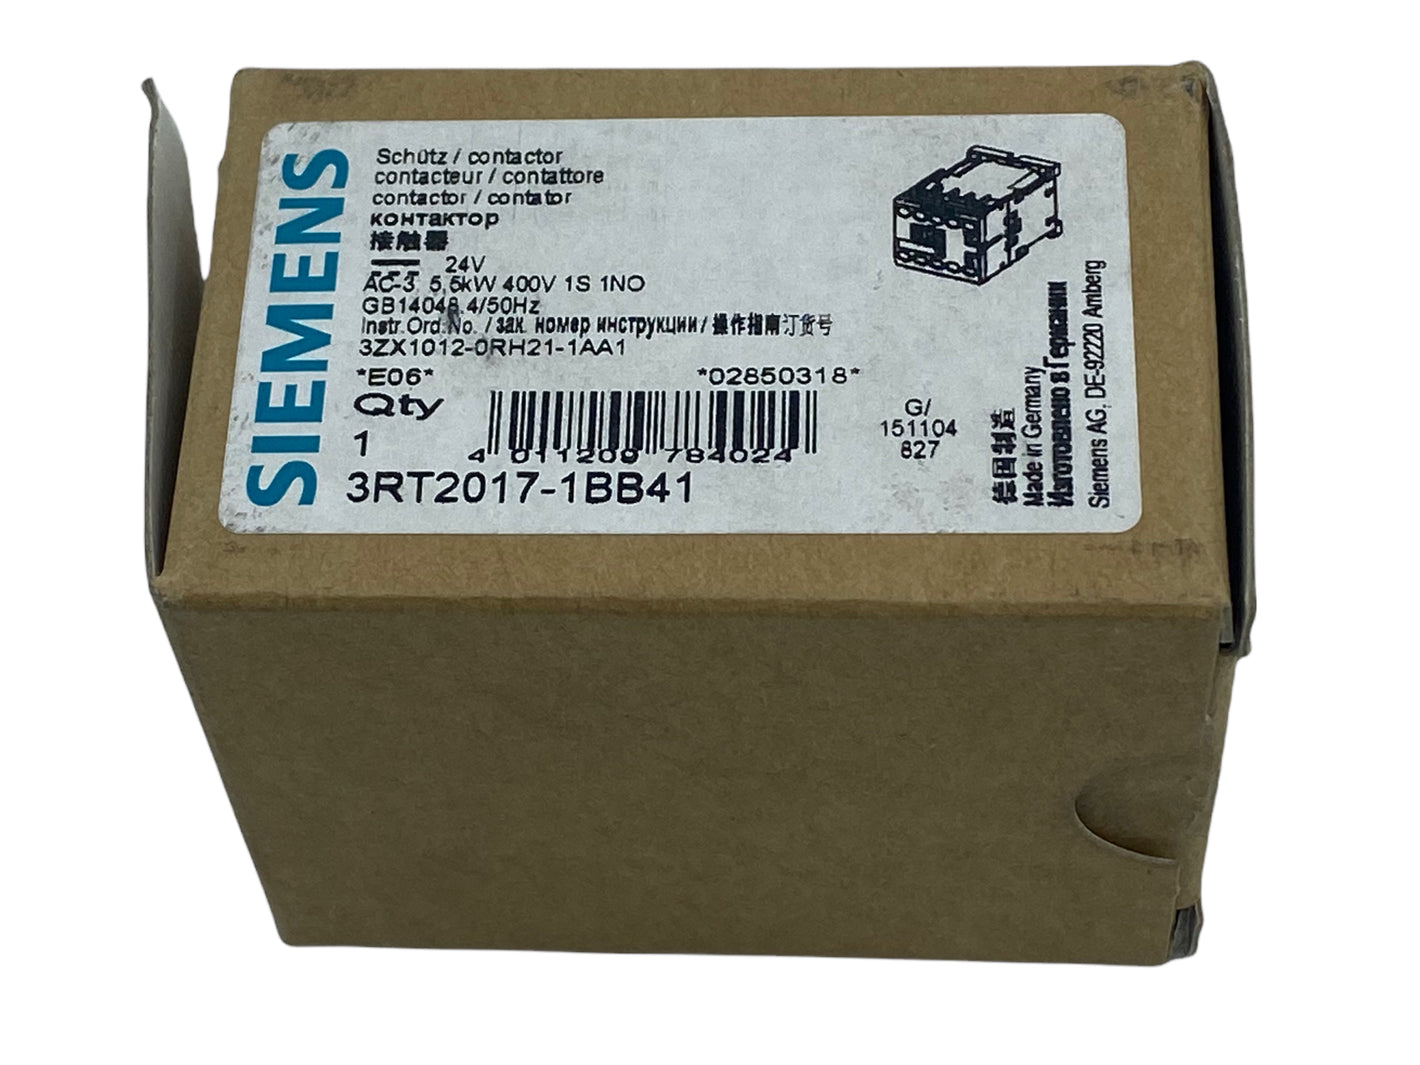 Siemens 3RT2017-1BB41 contactor 3-pole 3 NO contacts 24V DC IP20 400V AC 5.5 kW 